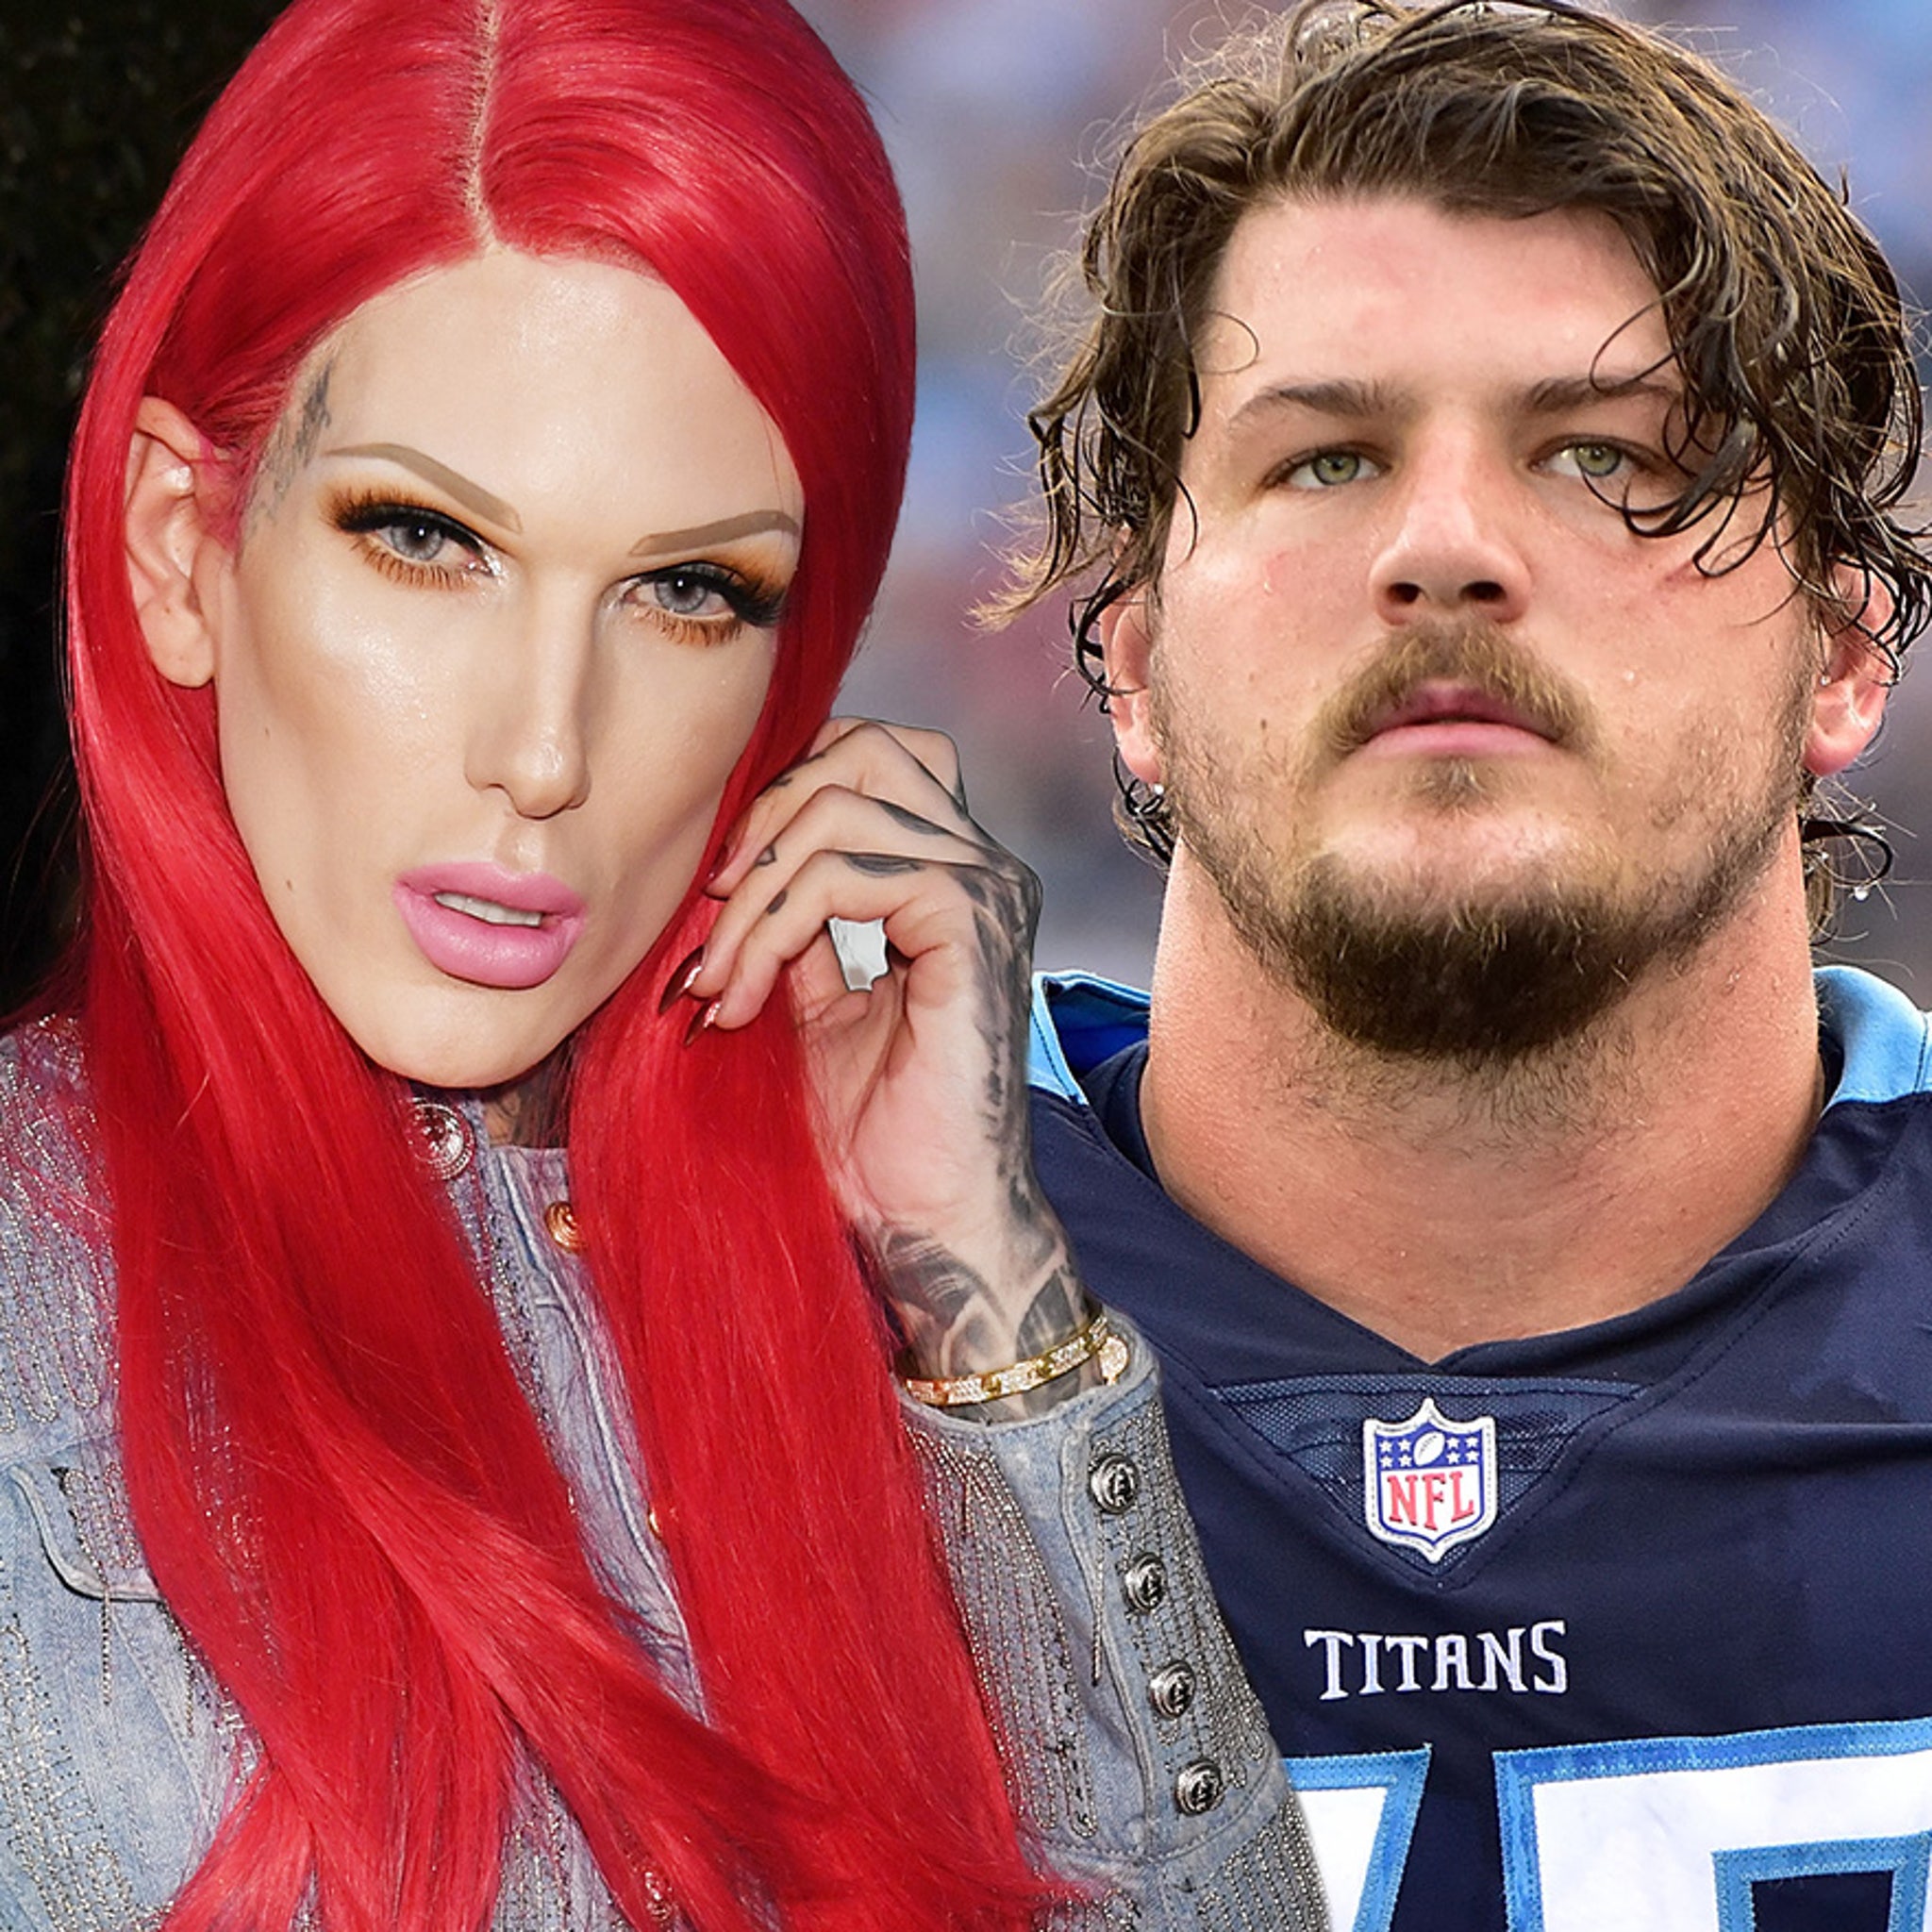 Jeffree Star Reveals 'NFL Boo' Is Taylor Lewan, But They're Just Doing  Podcast